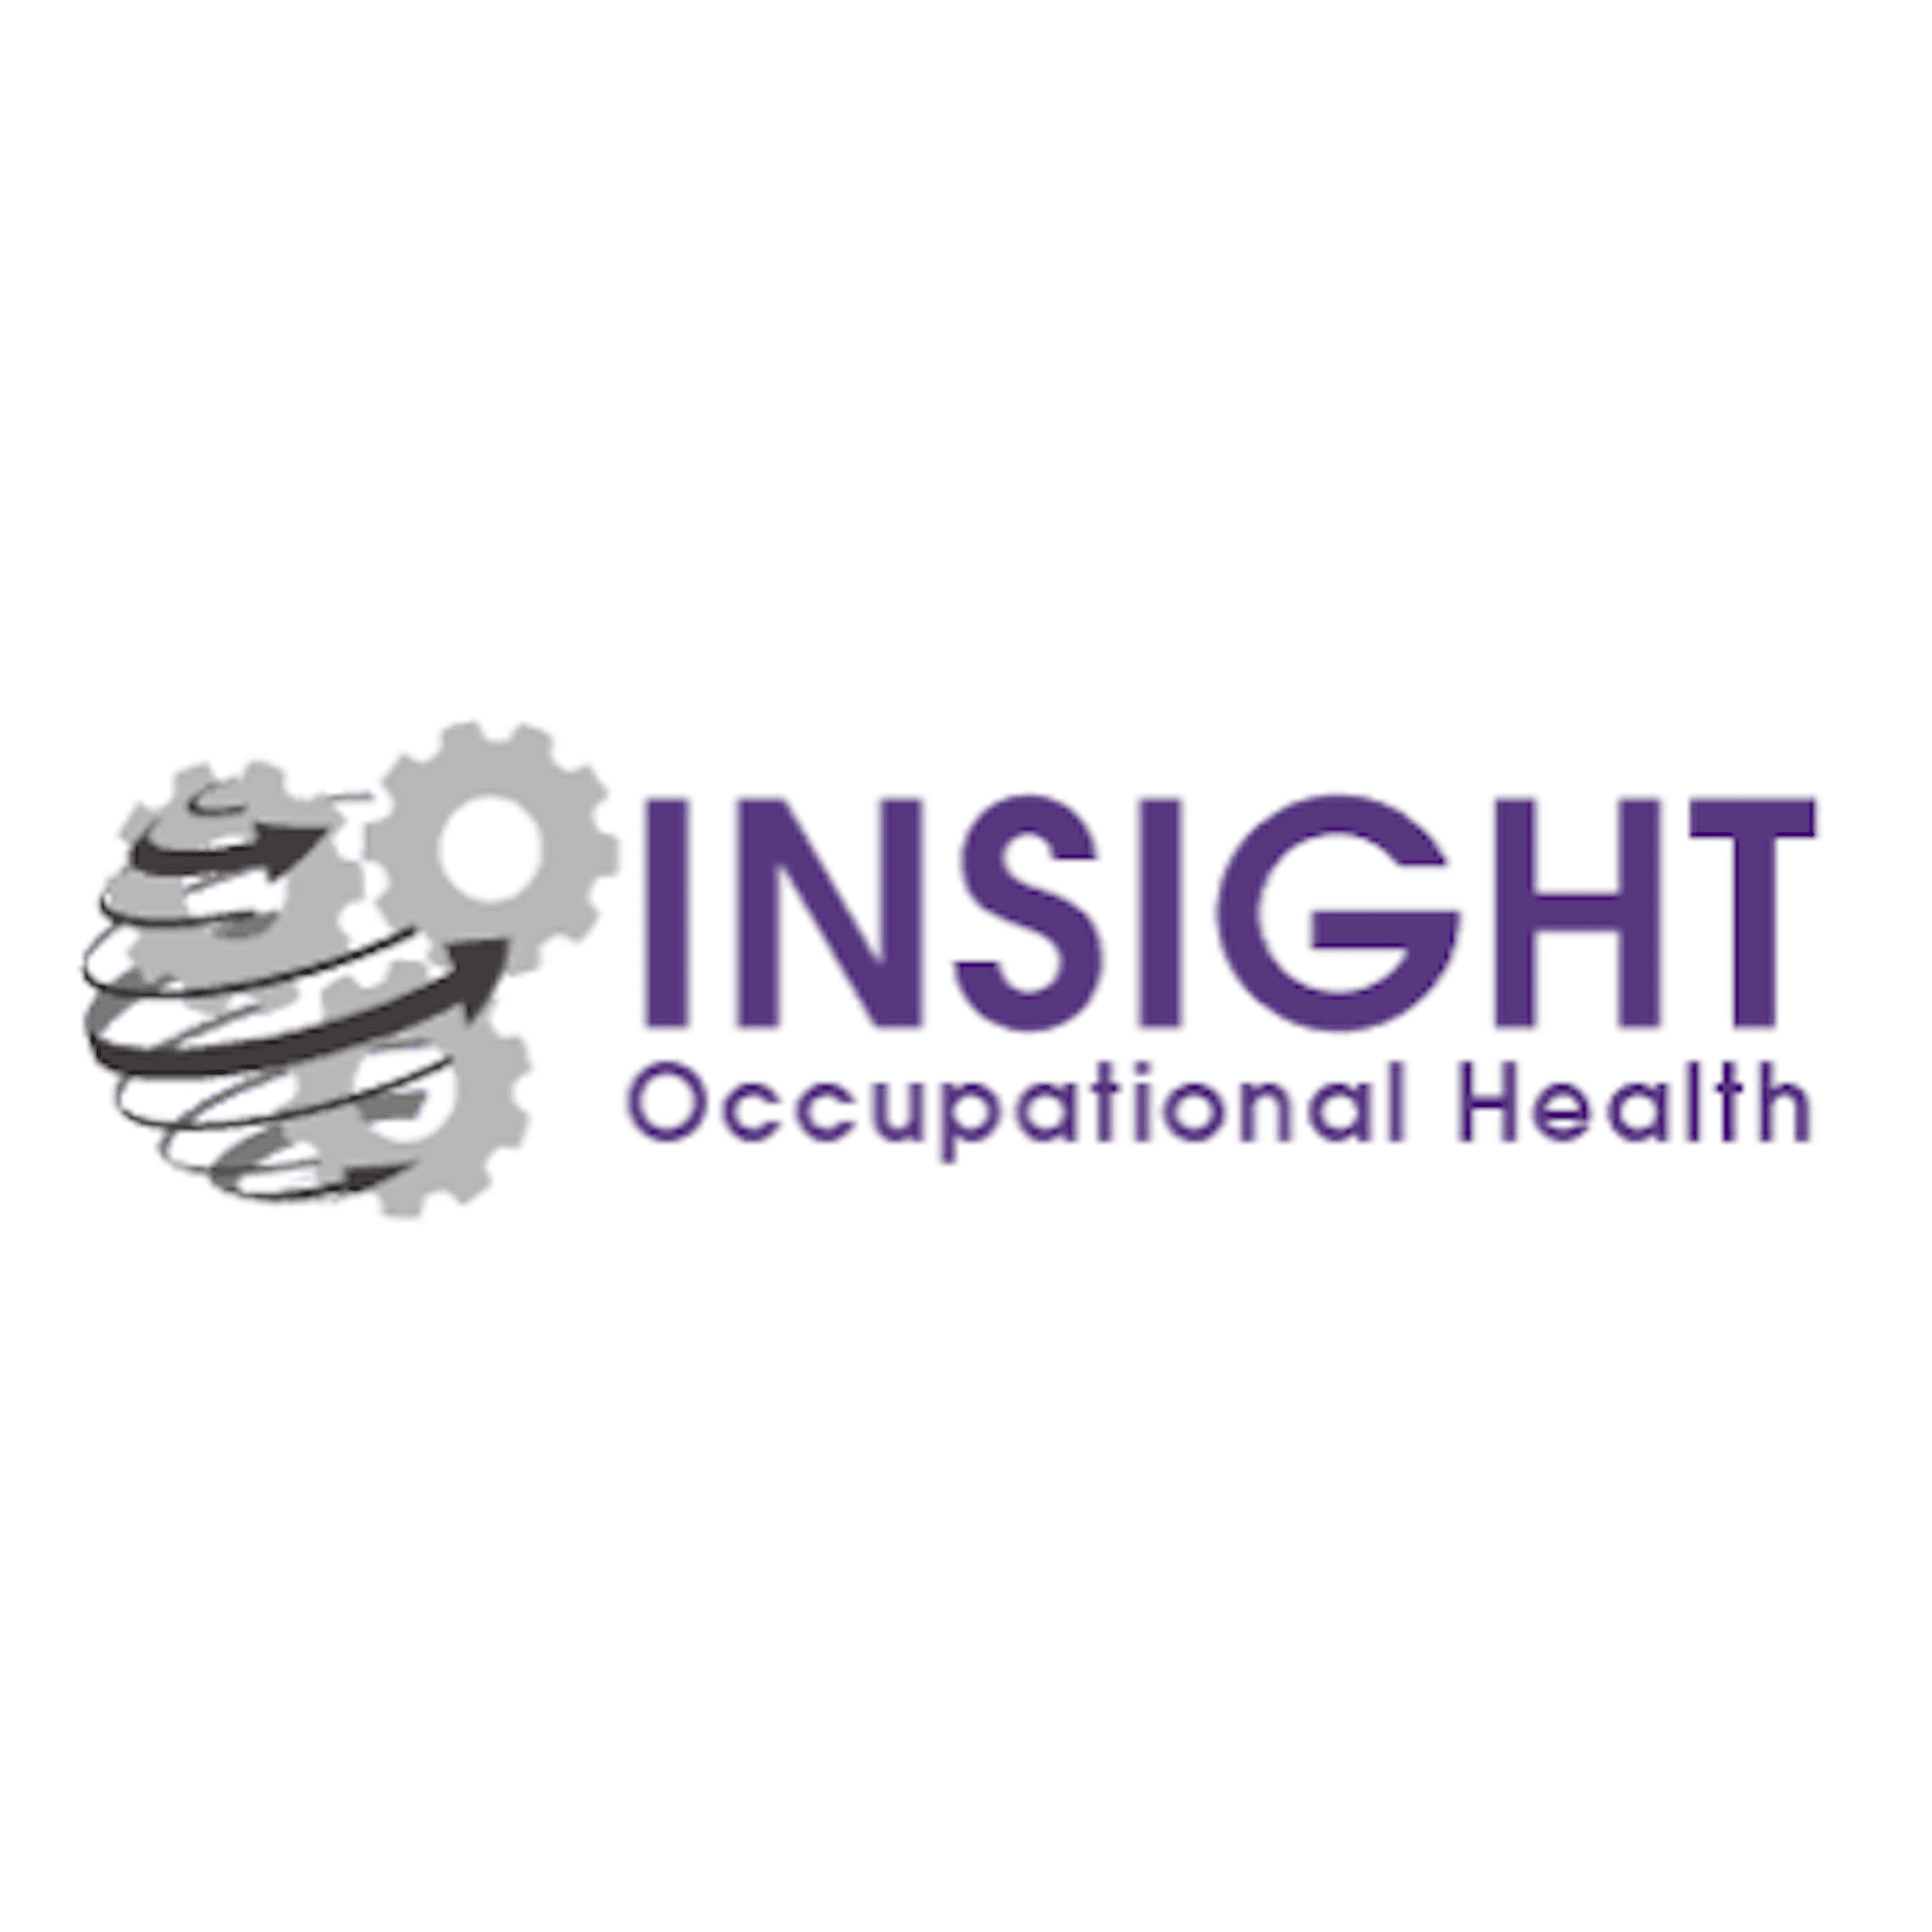 Insight Occupational Health - Gloucester, Gloucestershire GL1 2EP - 01452 699793 | ShowMeLocal.com